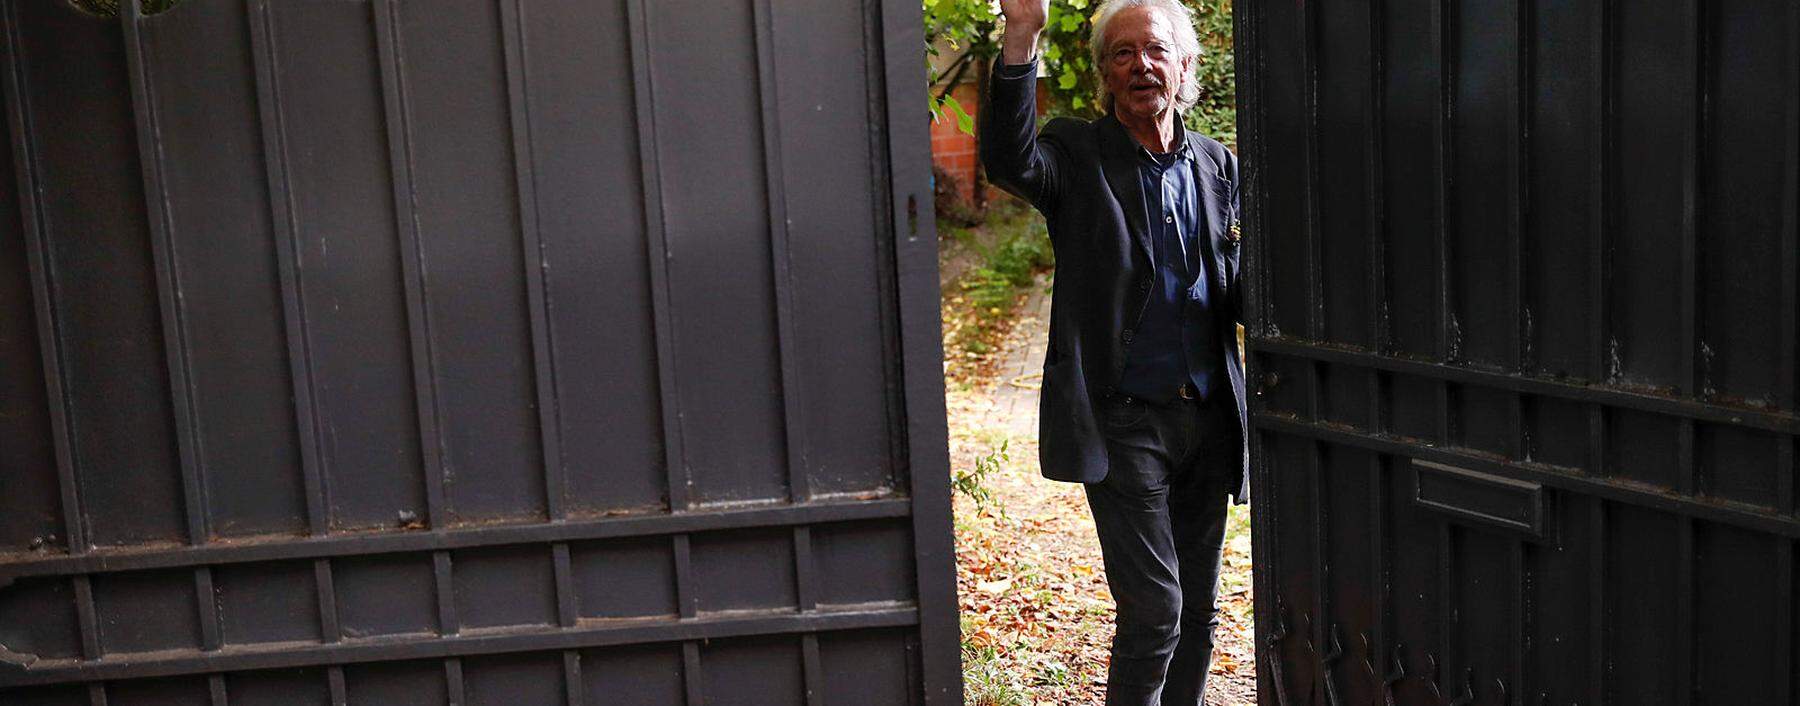 Austrian author Peter Handke gestures in his garden, following the announcement he won the 2019 Nobel Prize in Literature, in Chaville, near Paris